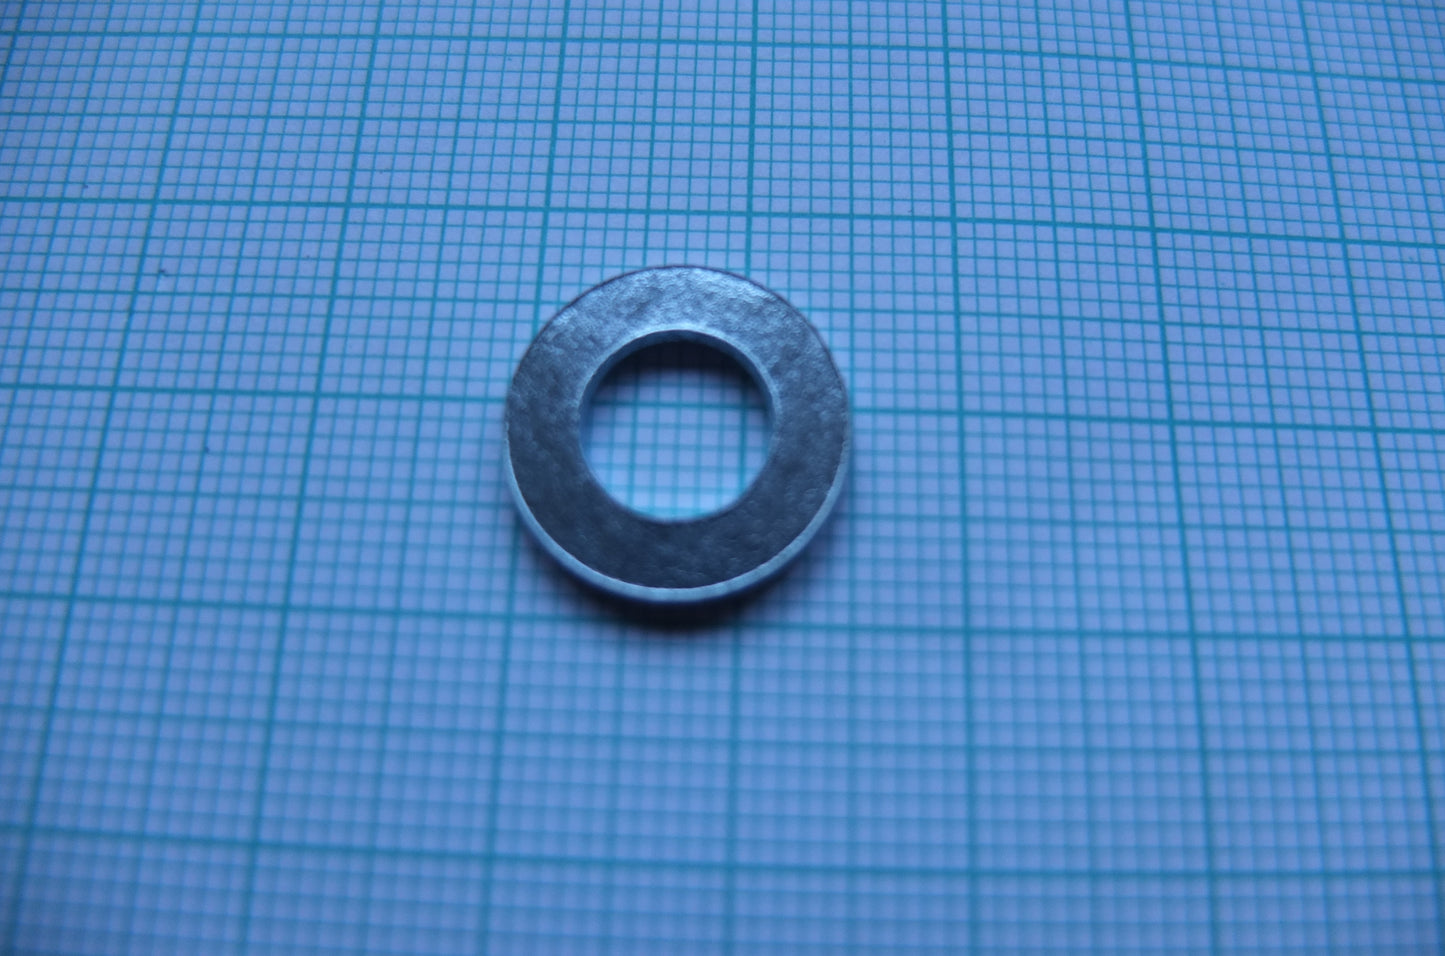 P5/046 Spacer Washer